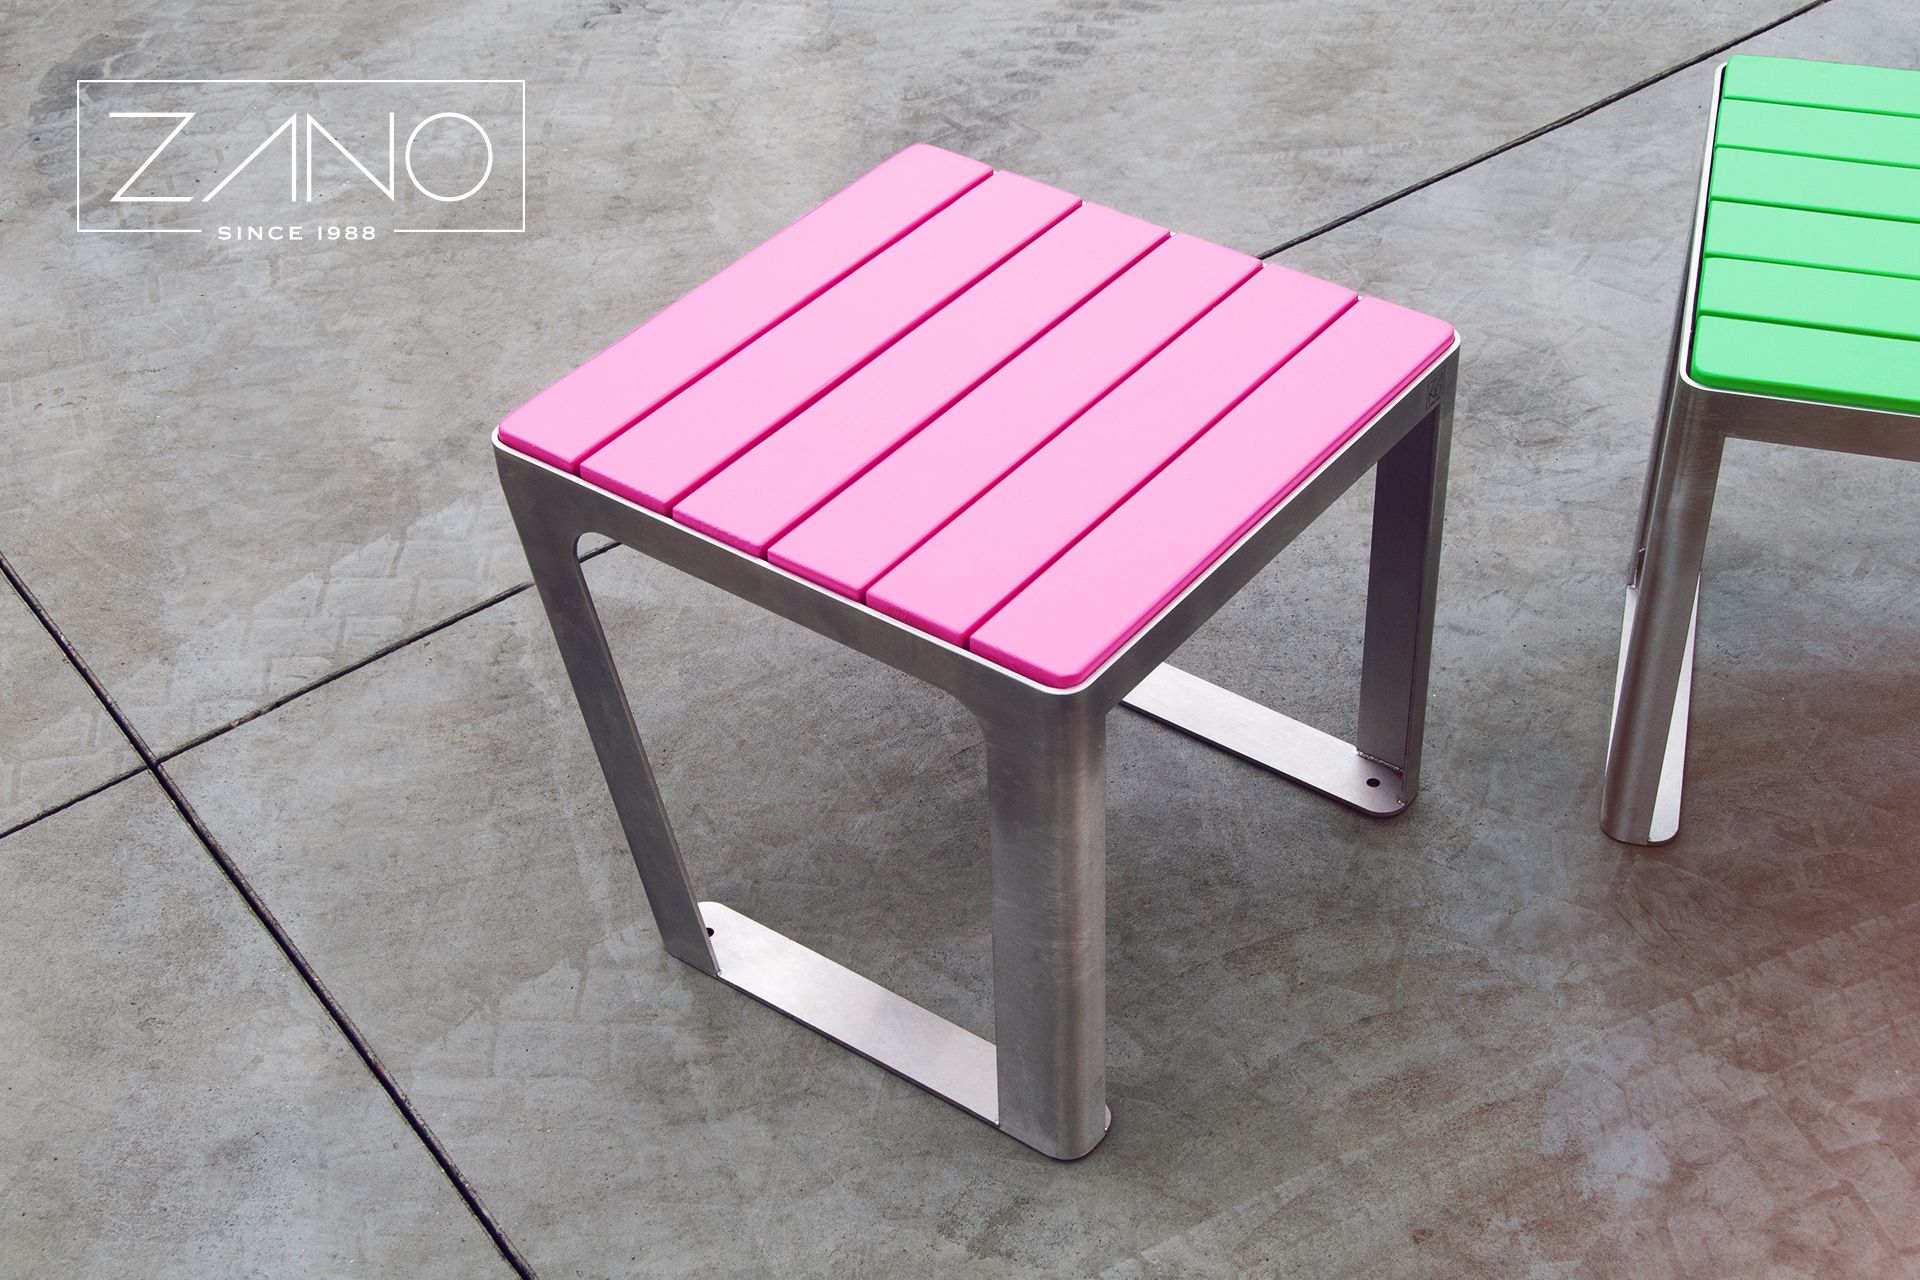 Stainless steel single-seat bench